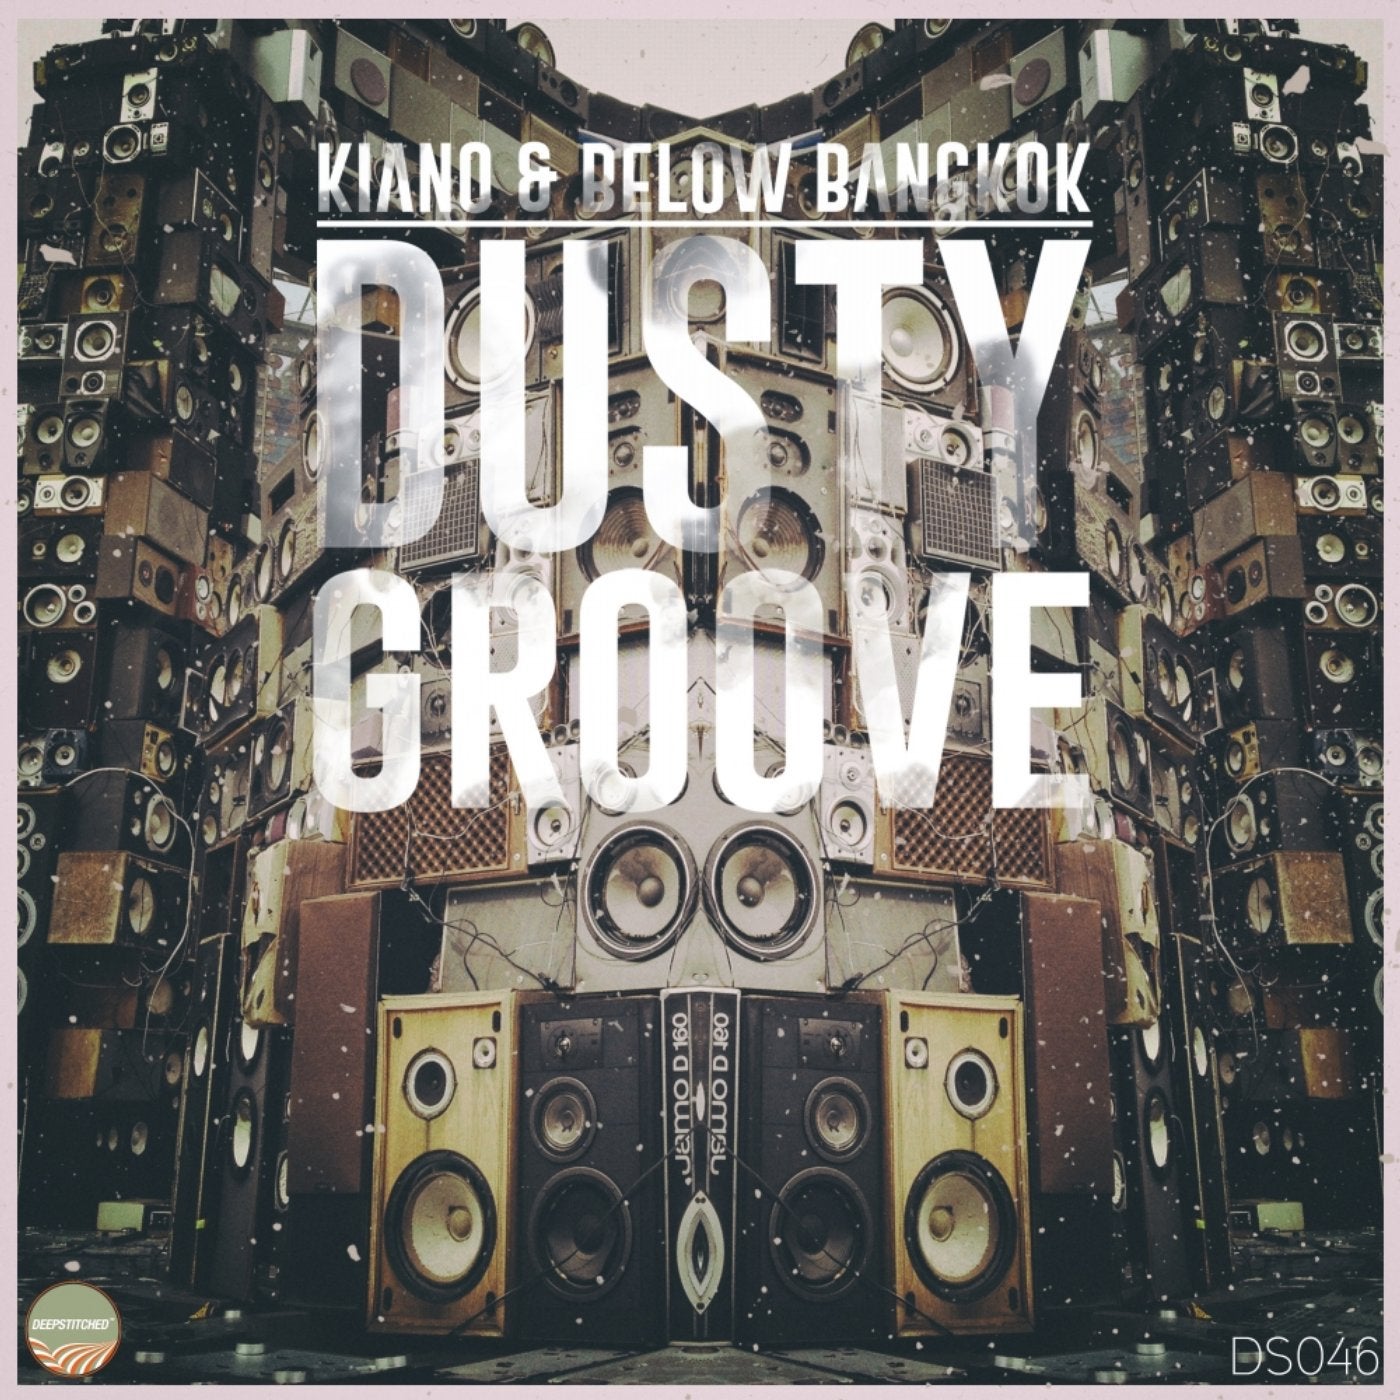 Dusty Groove